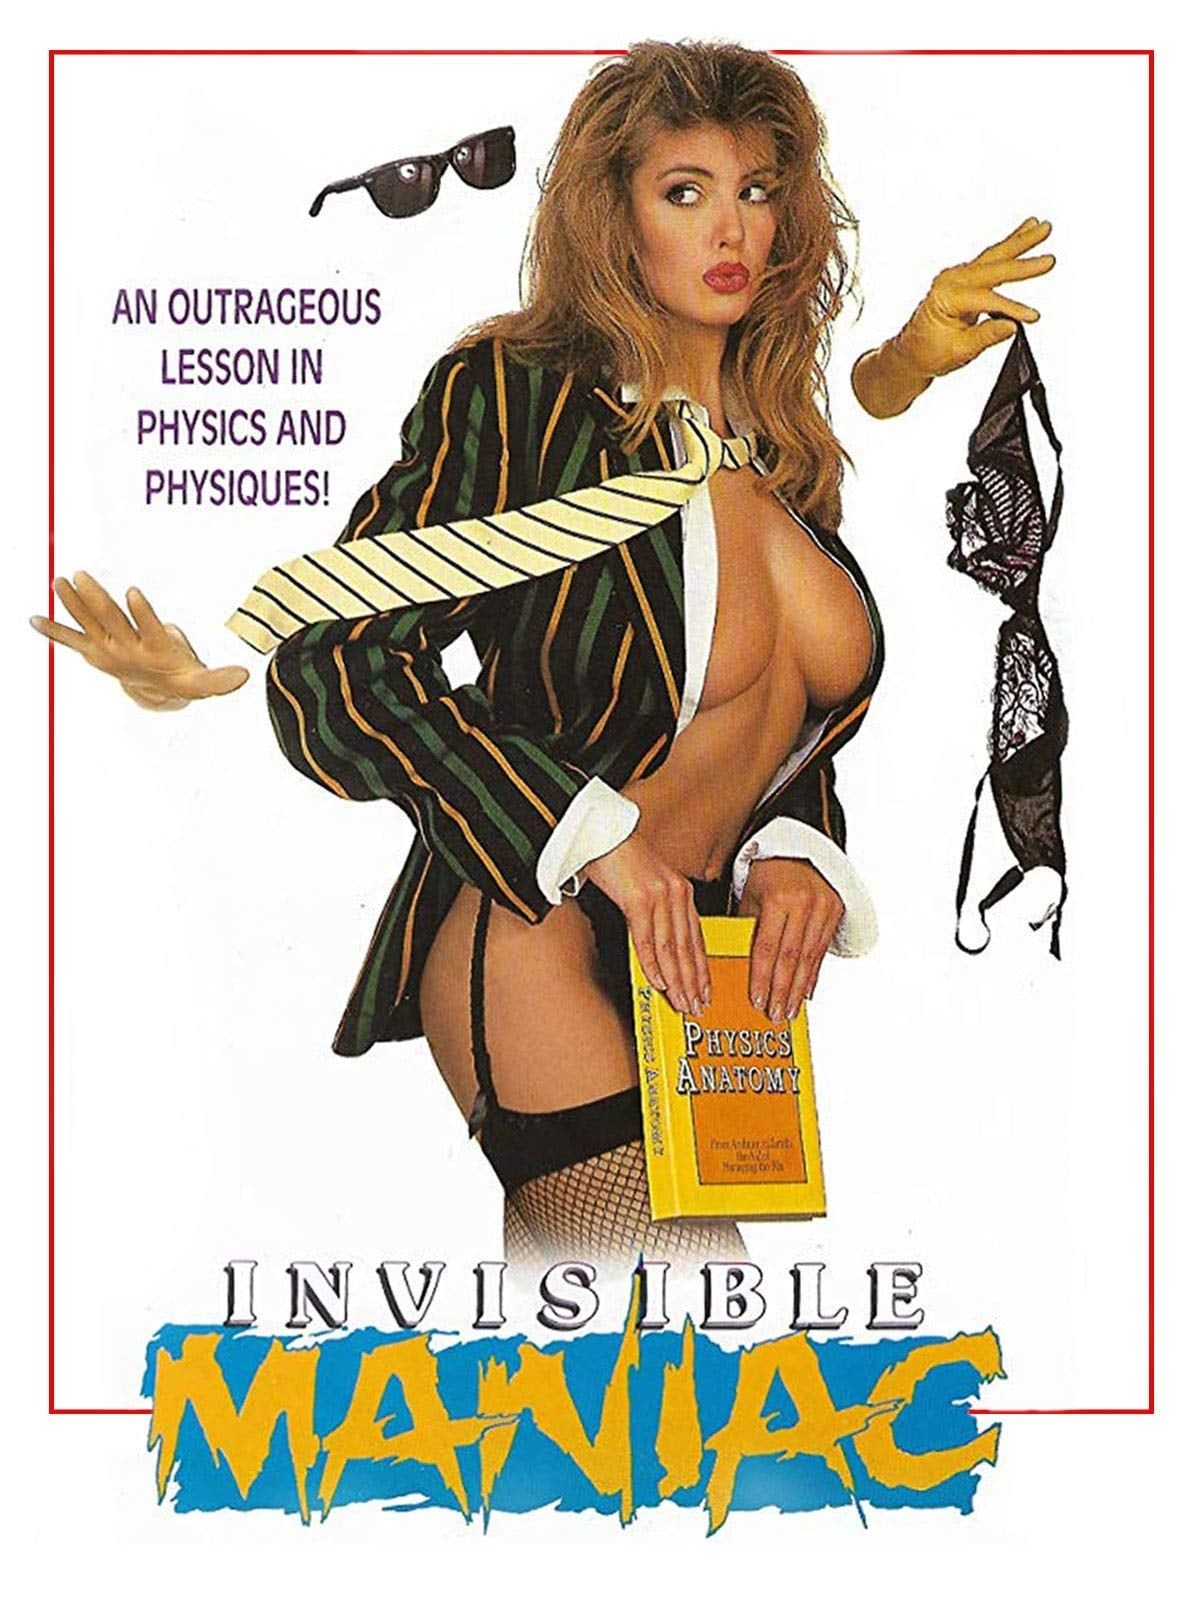 [18+] The Invisible Maniac (1990) Hindi Dubbed UNRATED BluRay download full movie